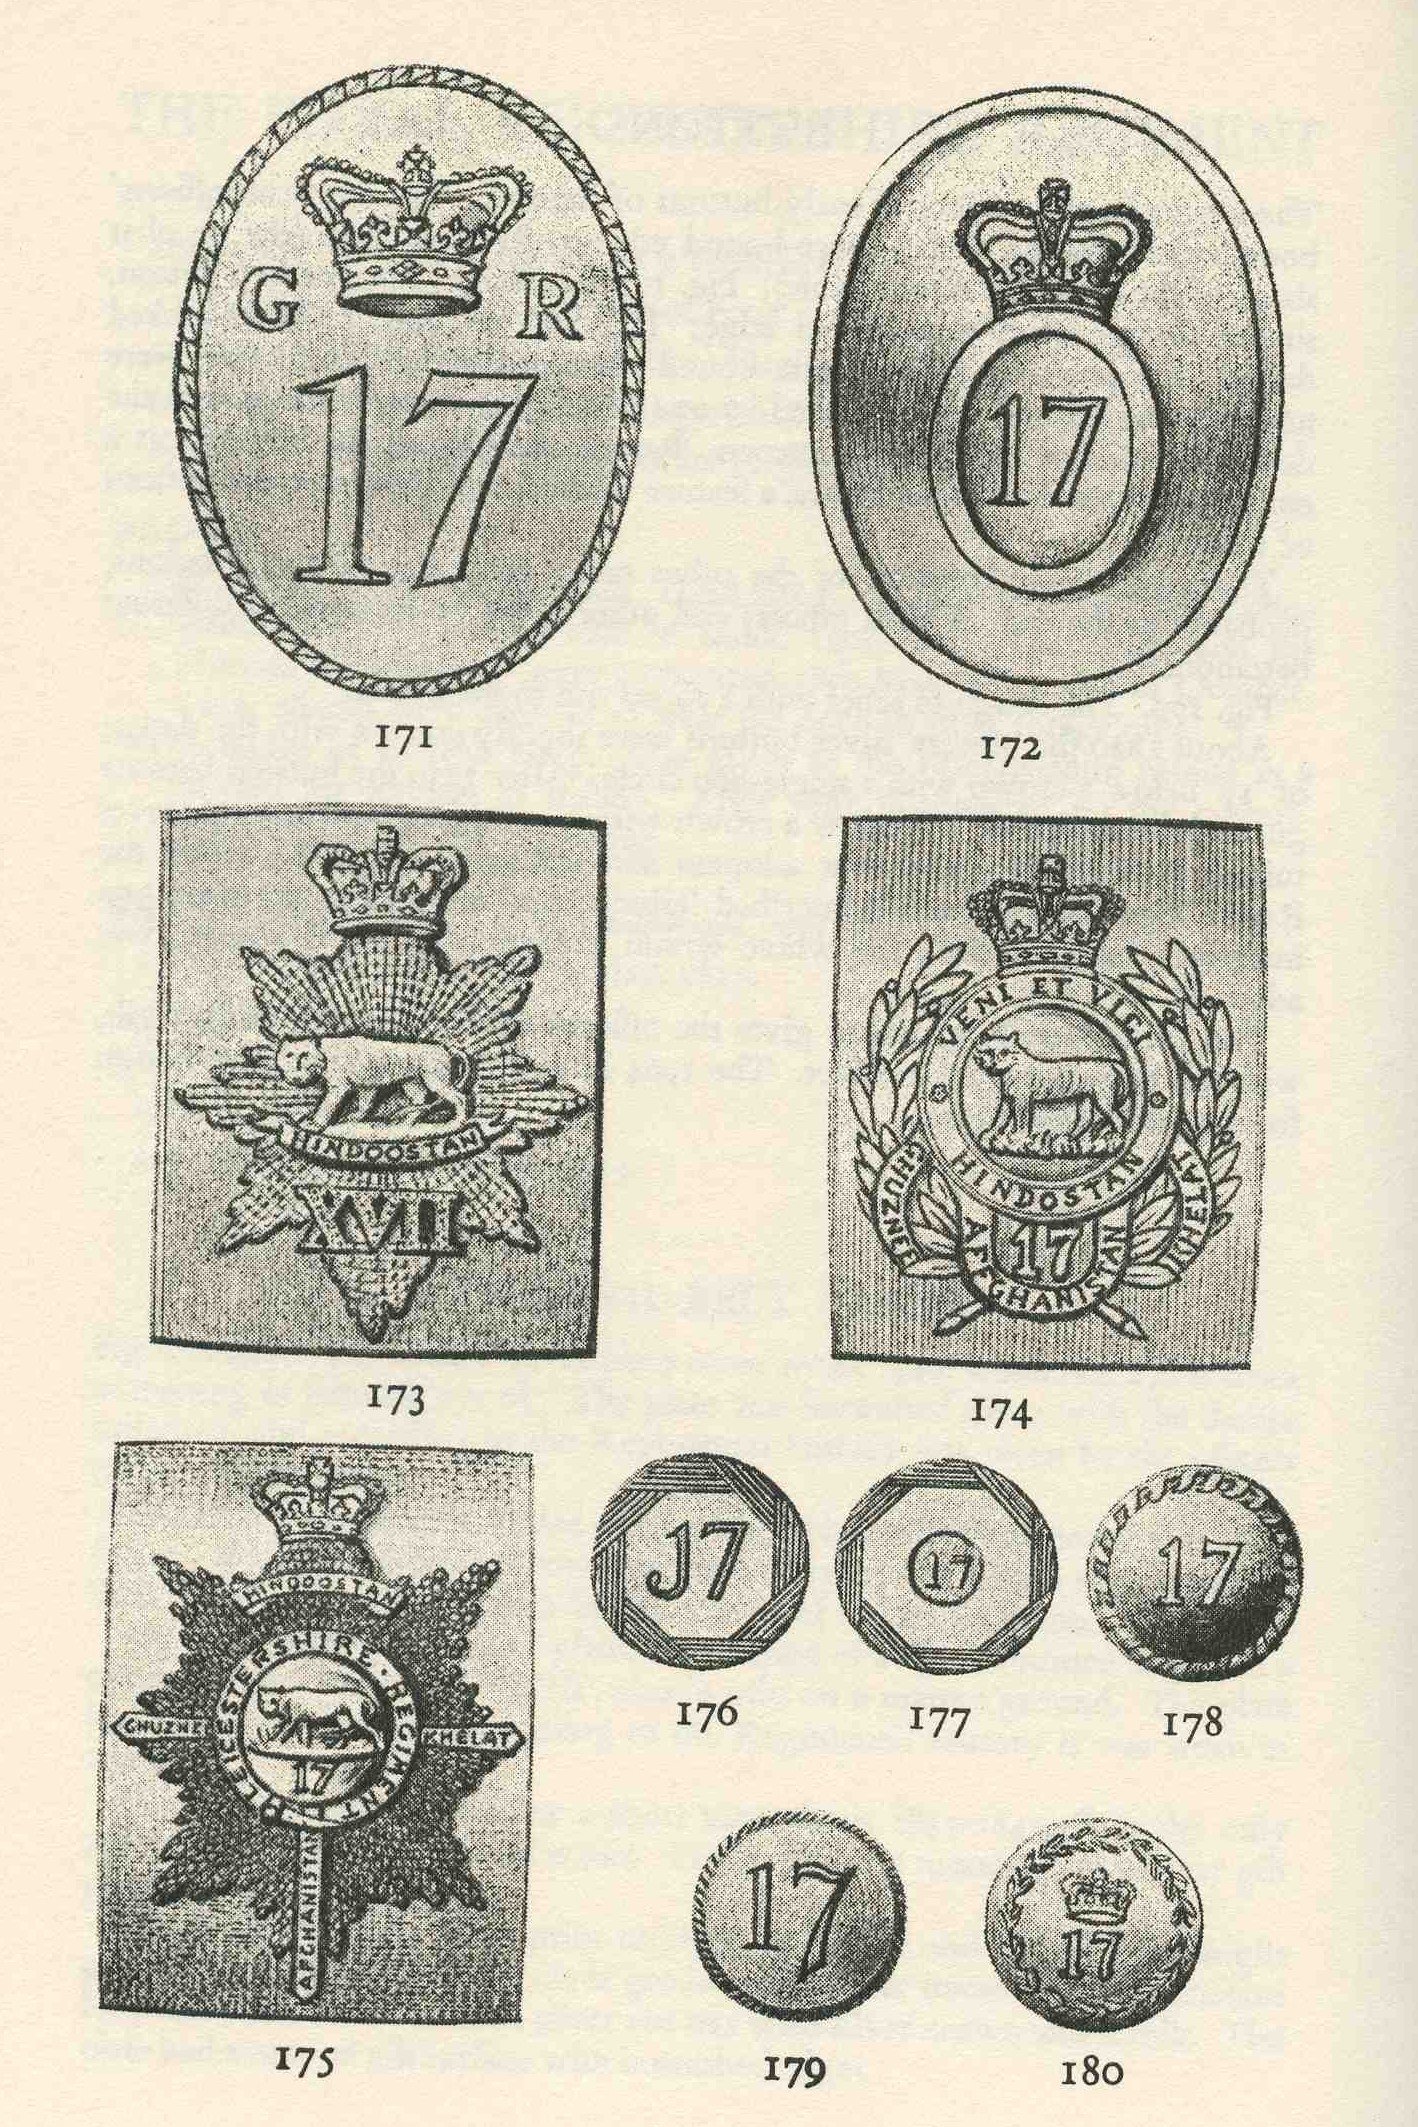 17th Regt belt plates and buttons